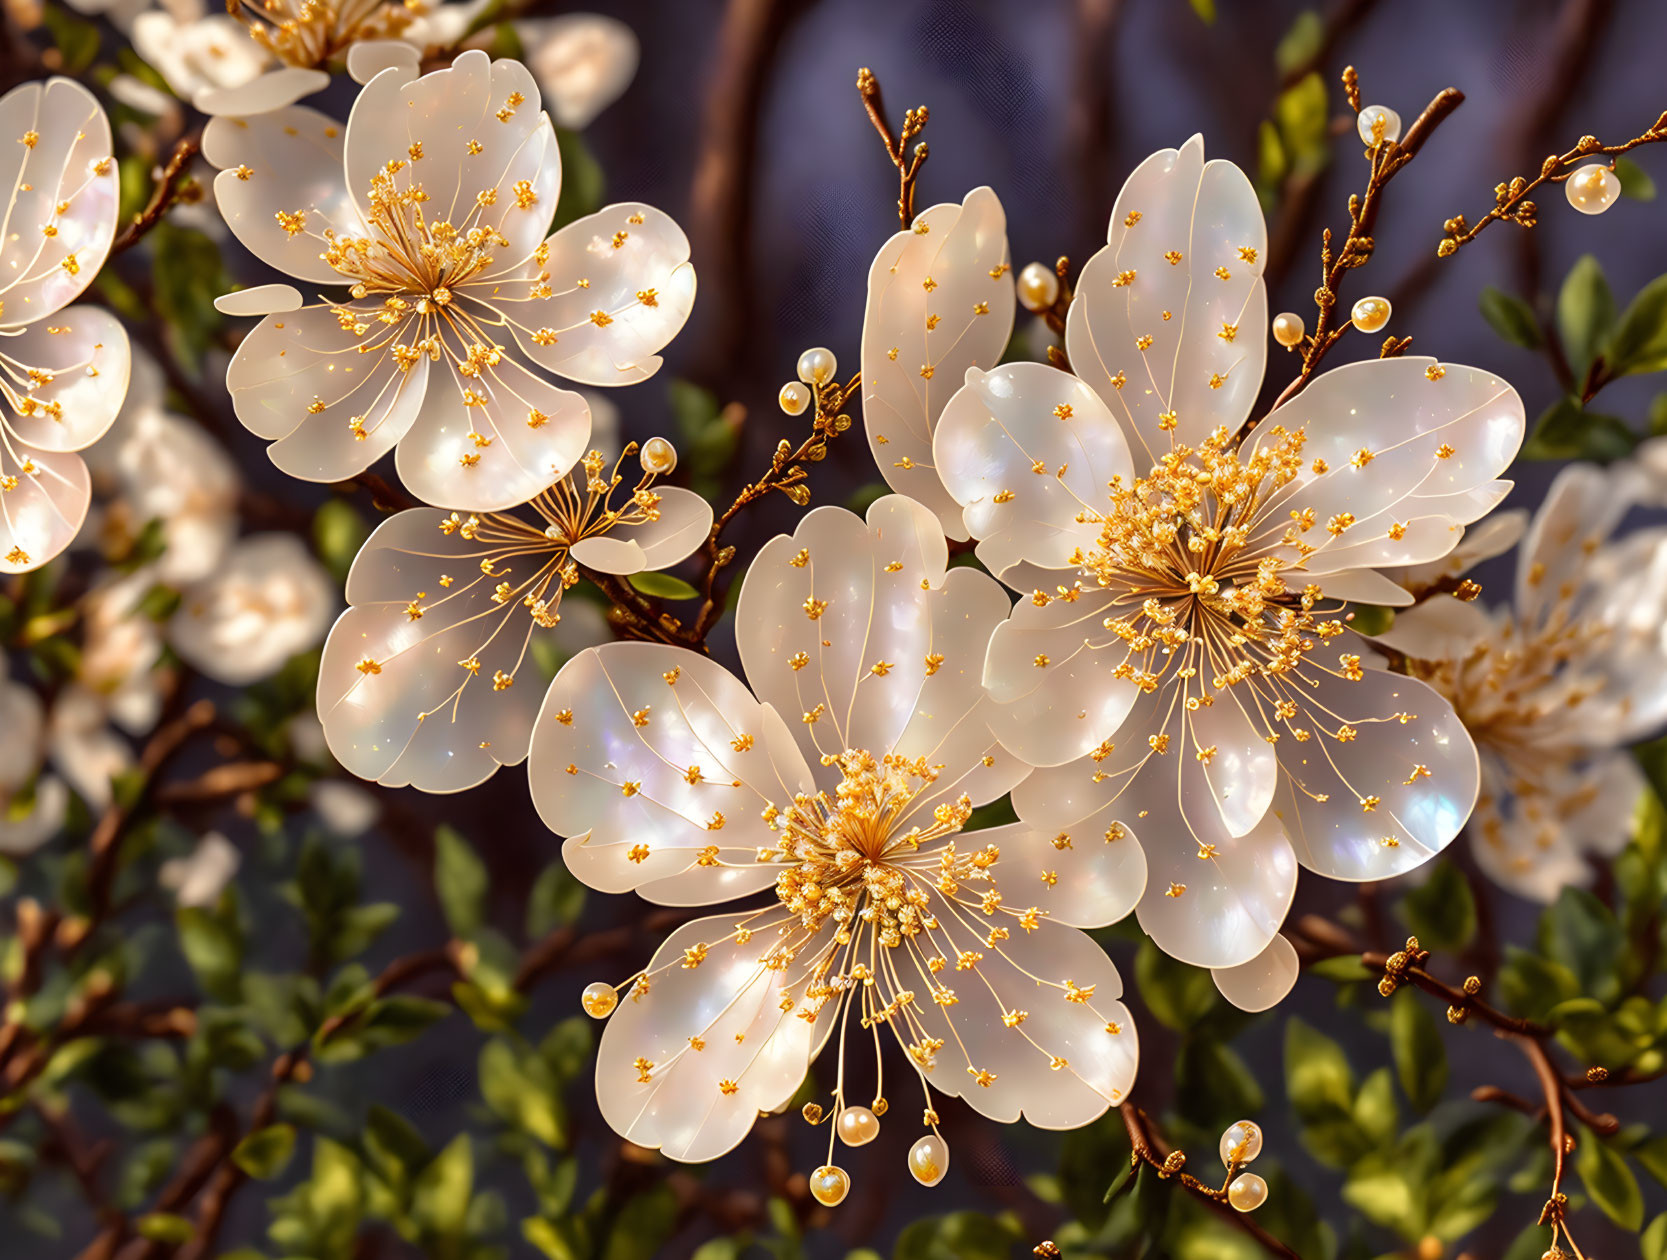 Delicate white cherry blossoms with golden stamens and dewdrops in blurred springtime background